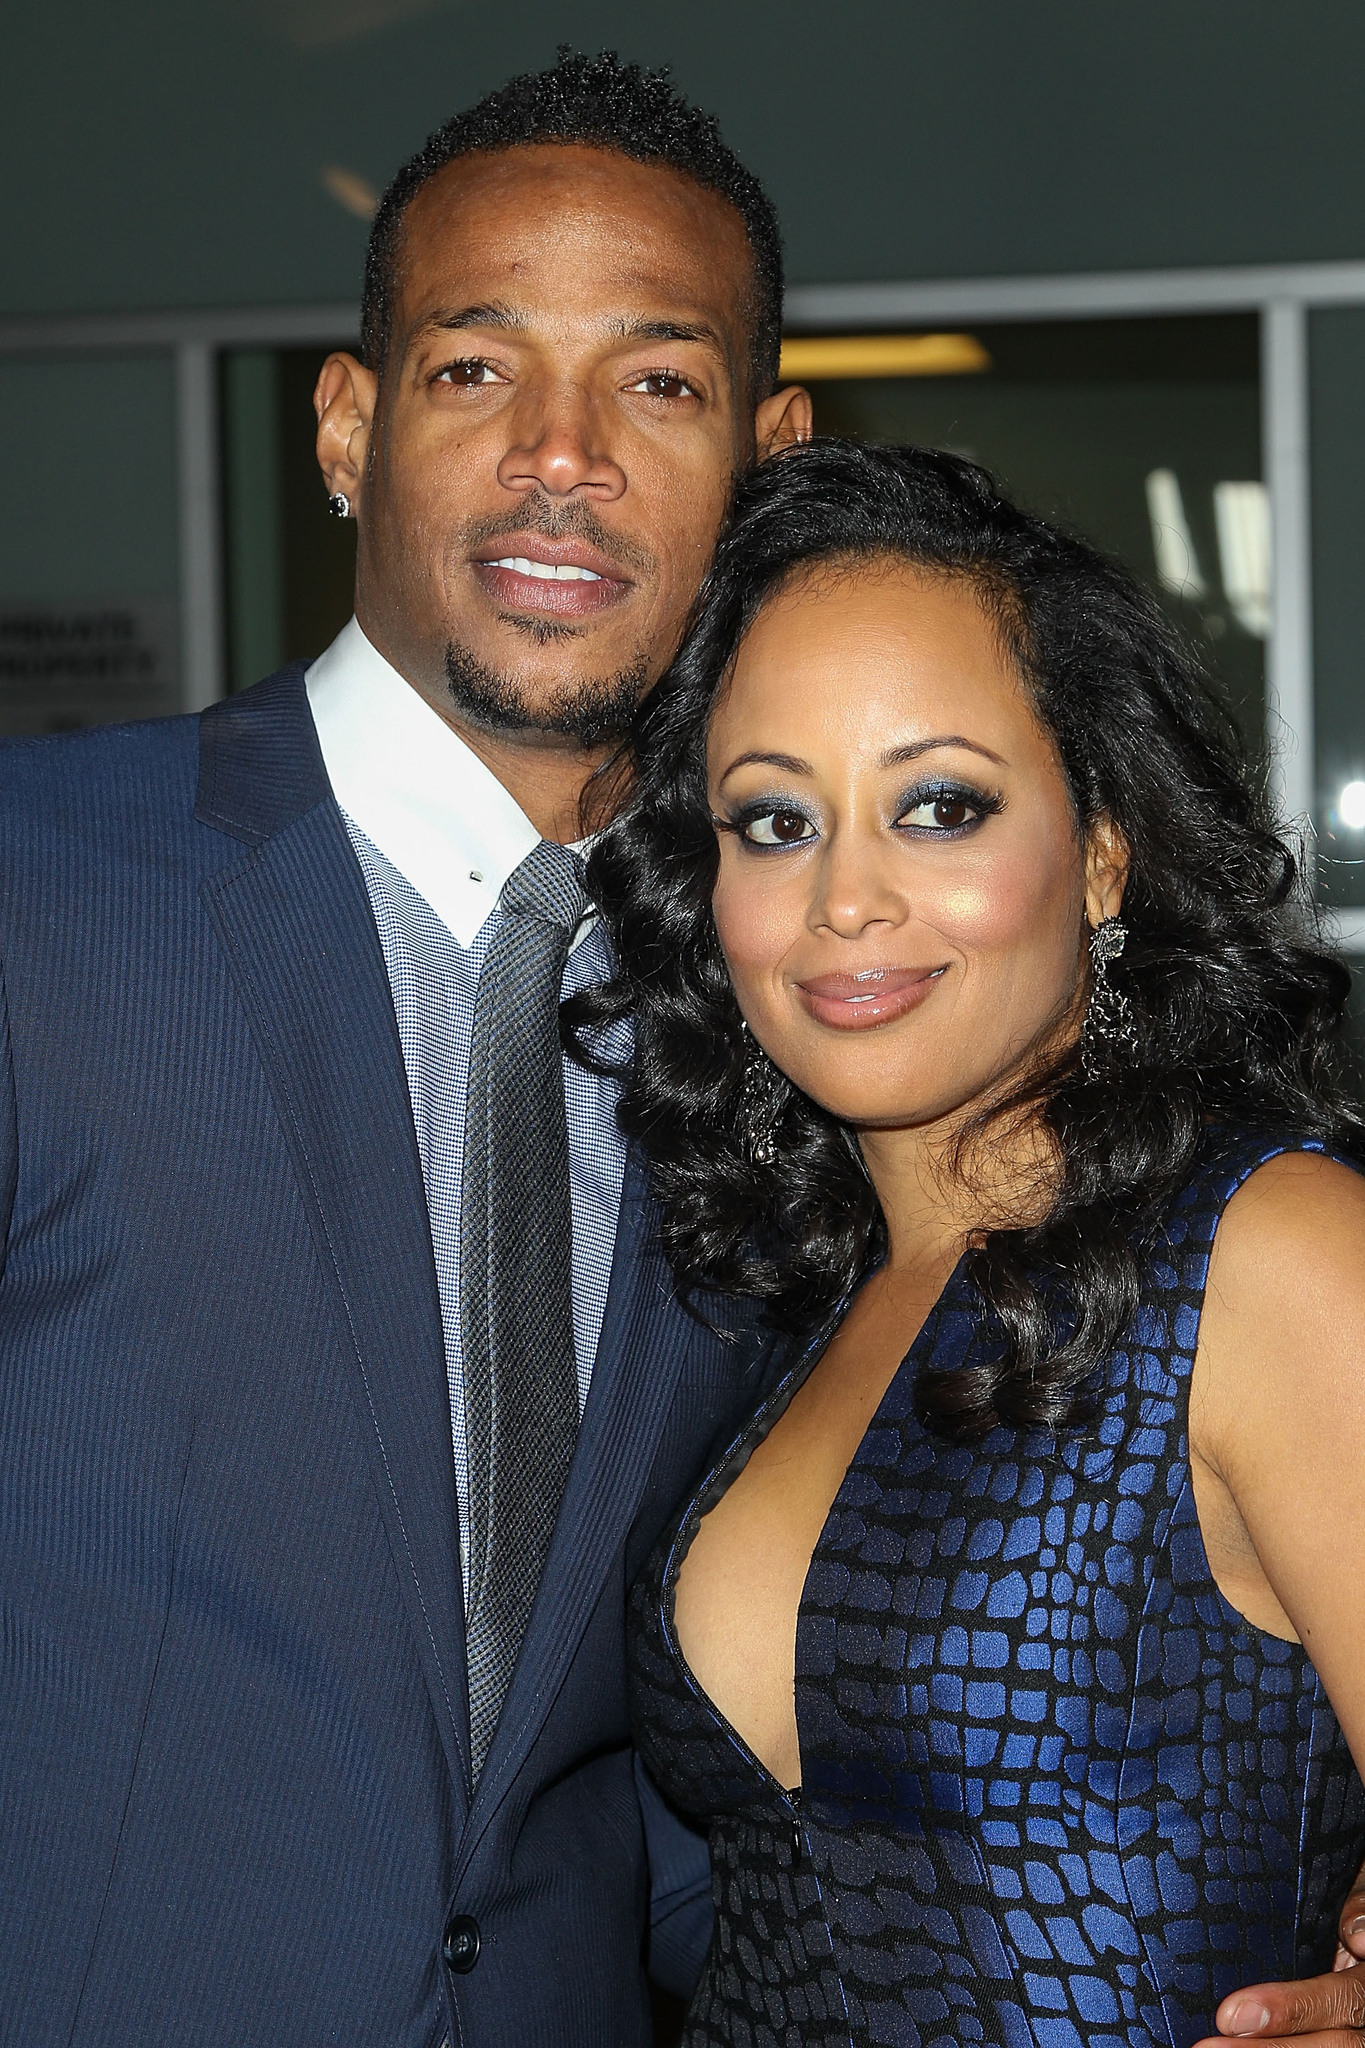 Marlon Wayans and Essence Atkins at event of A Haunted House (2013)